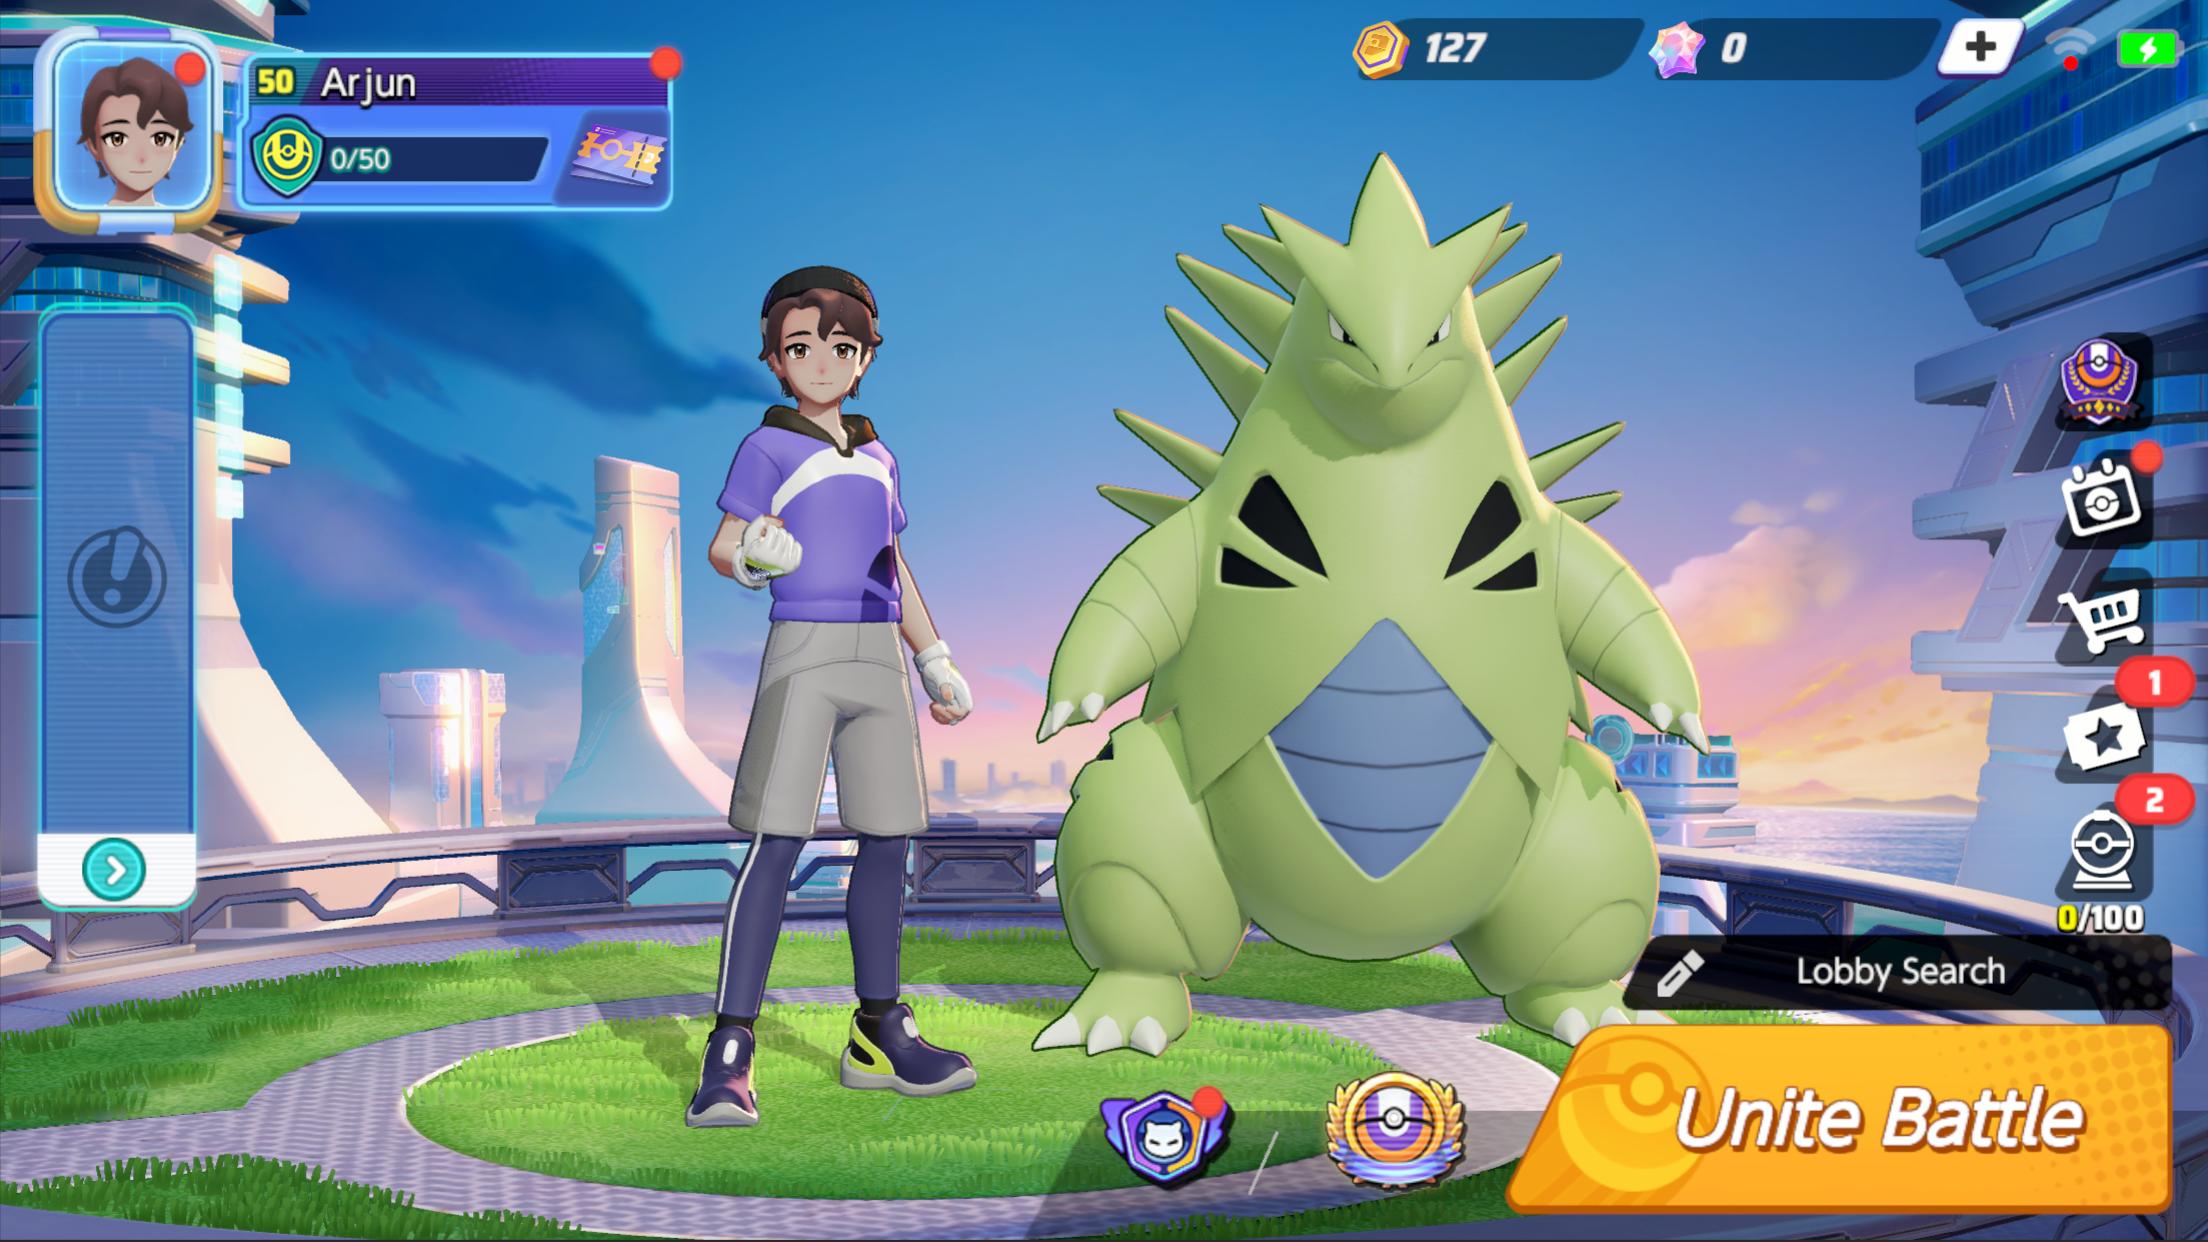 English Version] Pokémon Shield Apk Download On Android, 100% Working